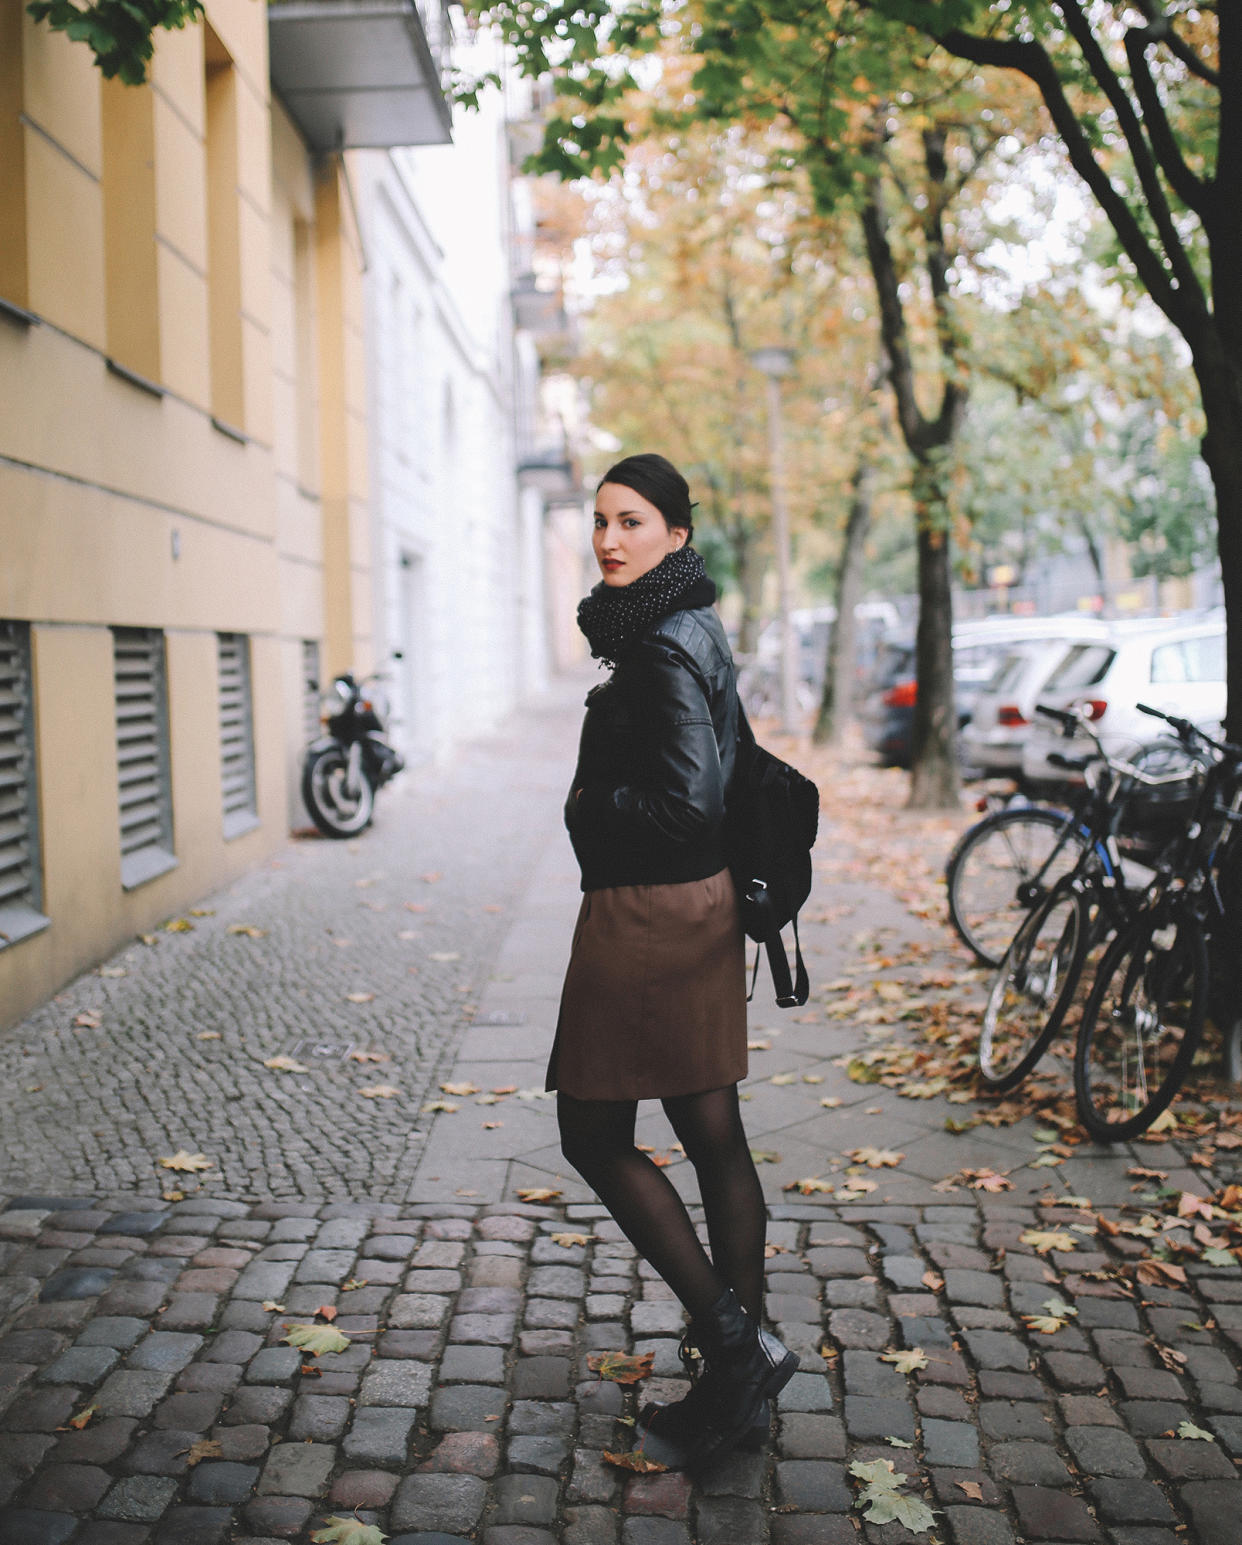 Vintage toned portrait of a young woman in Berlin, wearing a black leather jacket and a beige skirt, walking on the streets of Prenzlauer Berg, near Mitte in the late Autumn day. Street style, casual fashion concept.